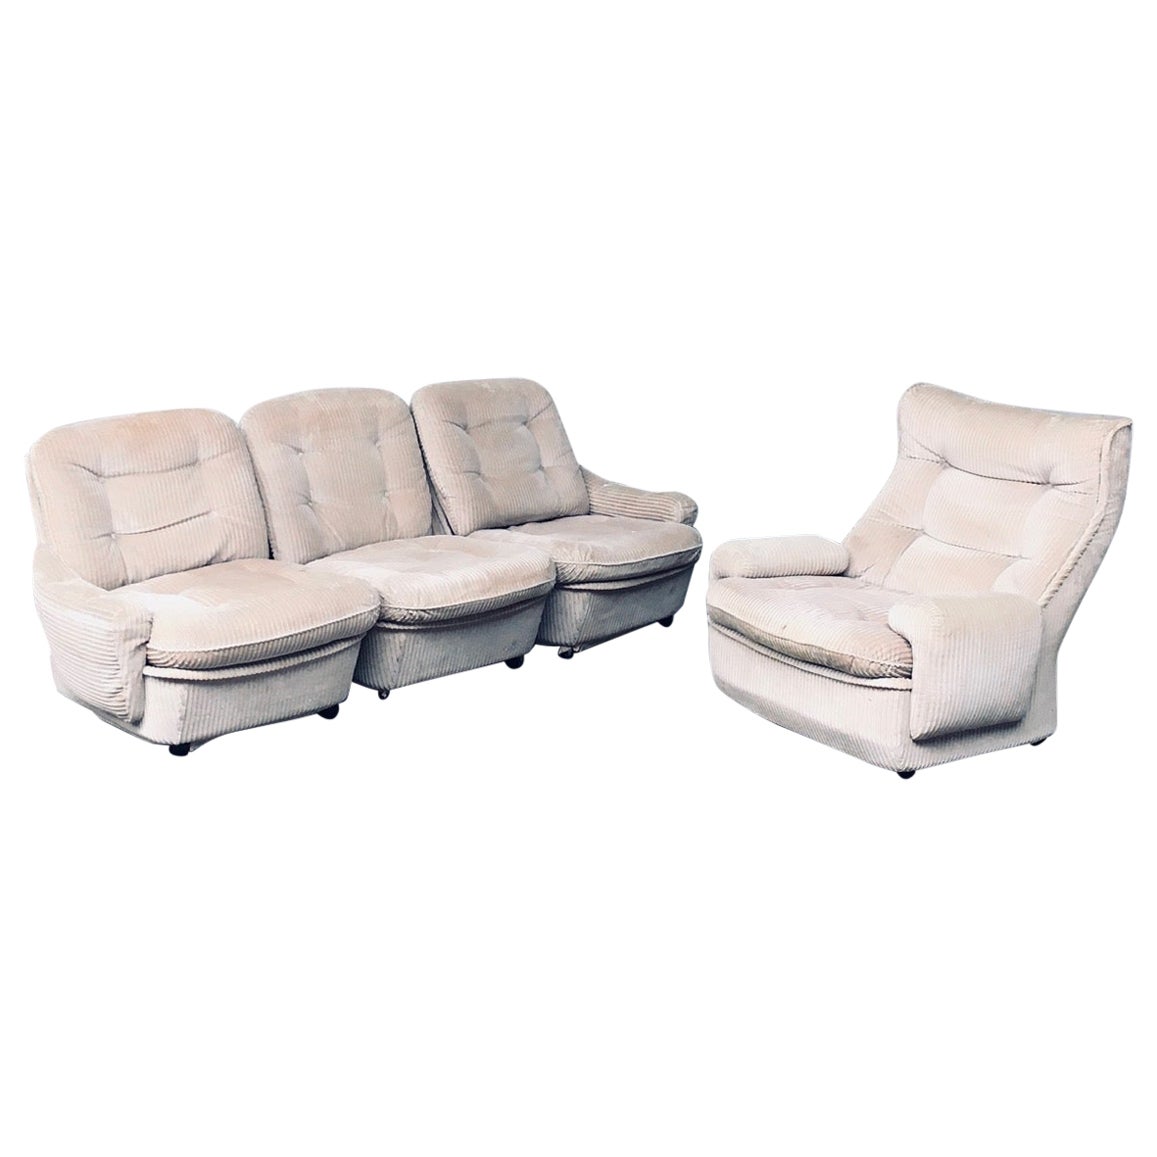 ORCHID Modular Sofa & Armchair by Michel Cadestin for Airborne, France 1970's For Sale